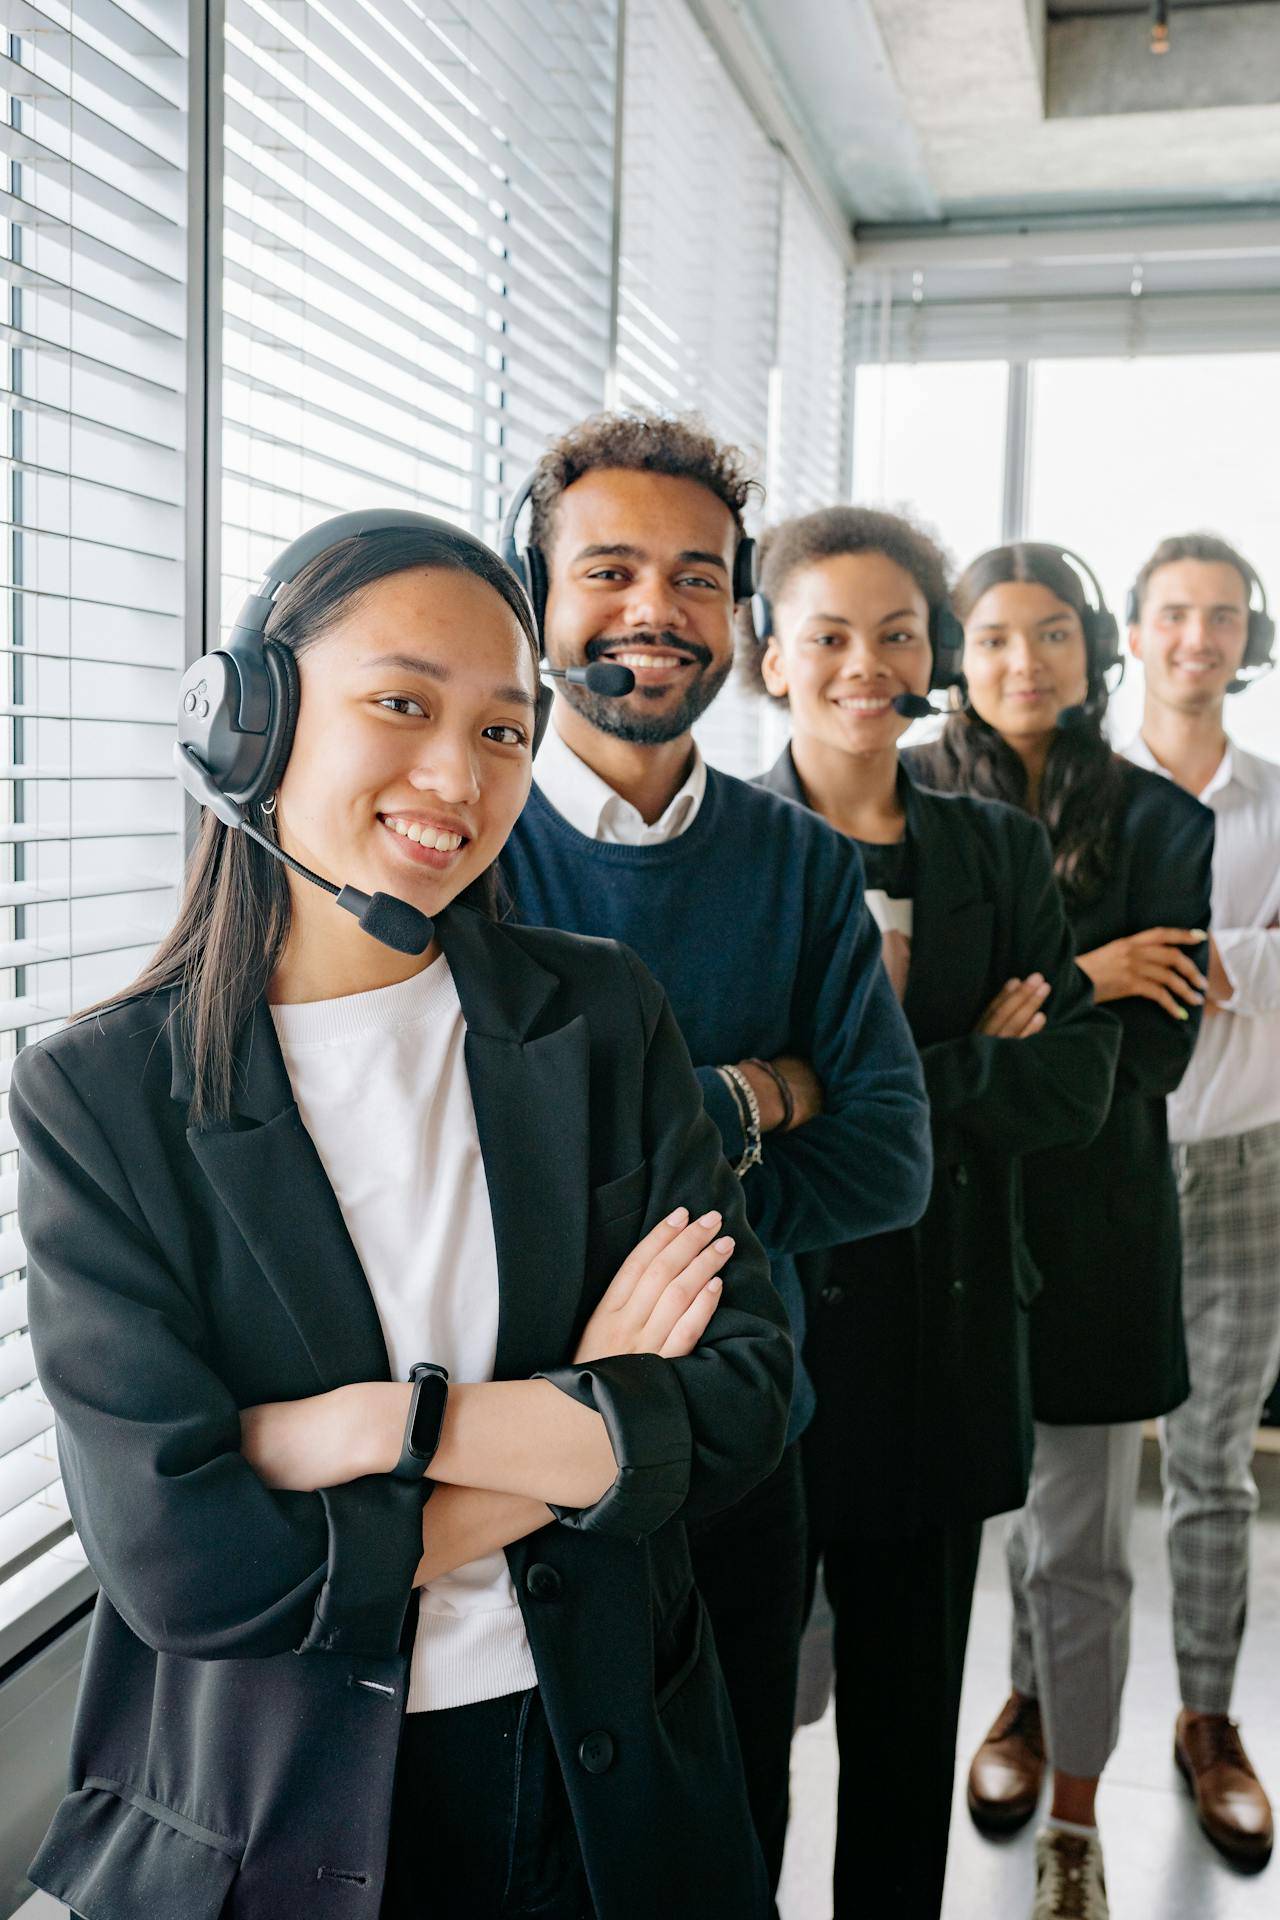 a Group of smiling Credit Union workers, representing the Importance of Standard Operating Procedures (SOPs) for Workplace Efficiency and Employee Confidence